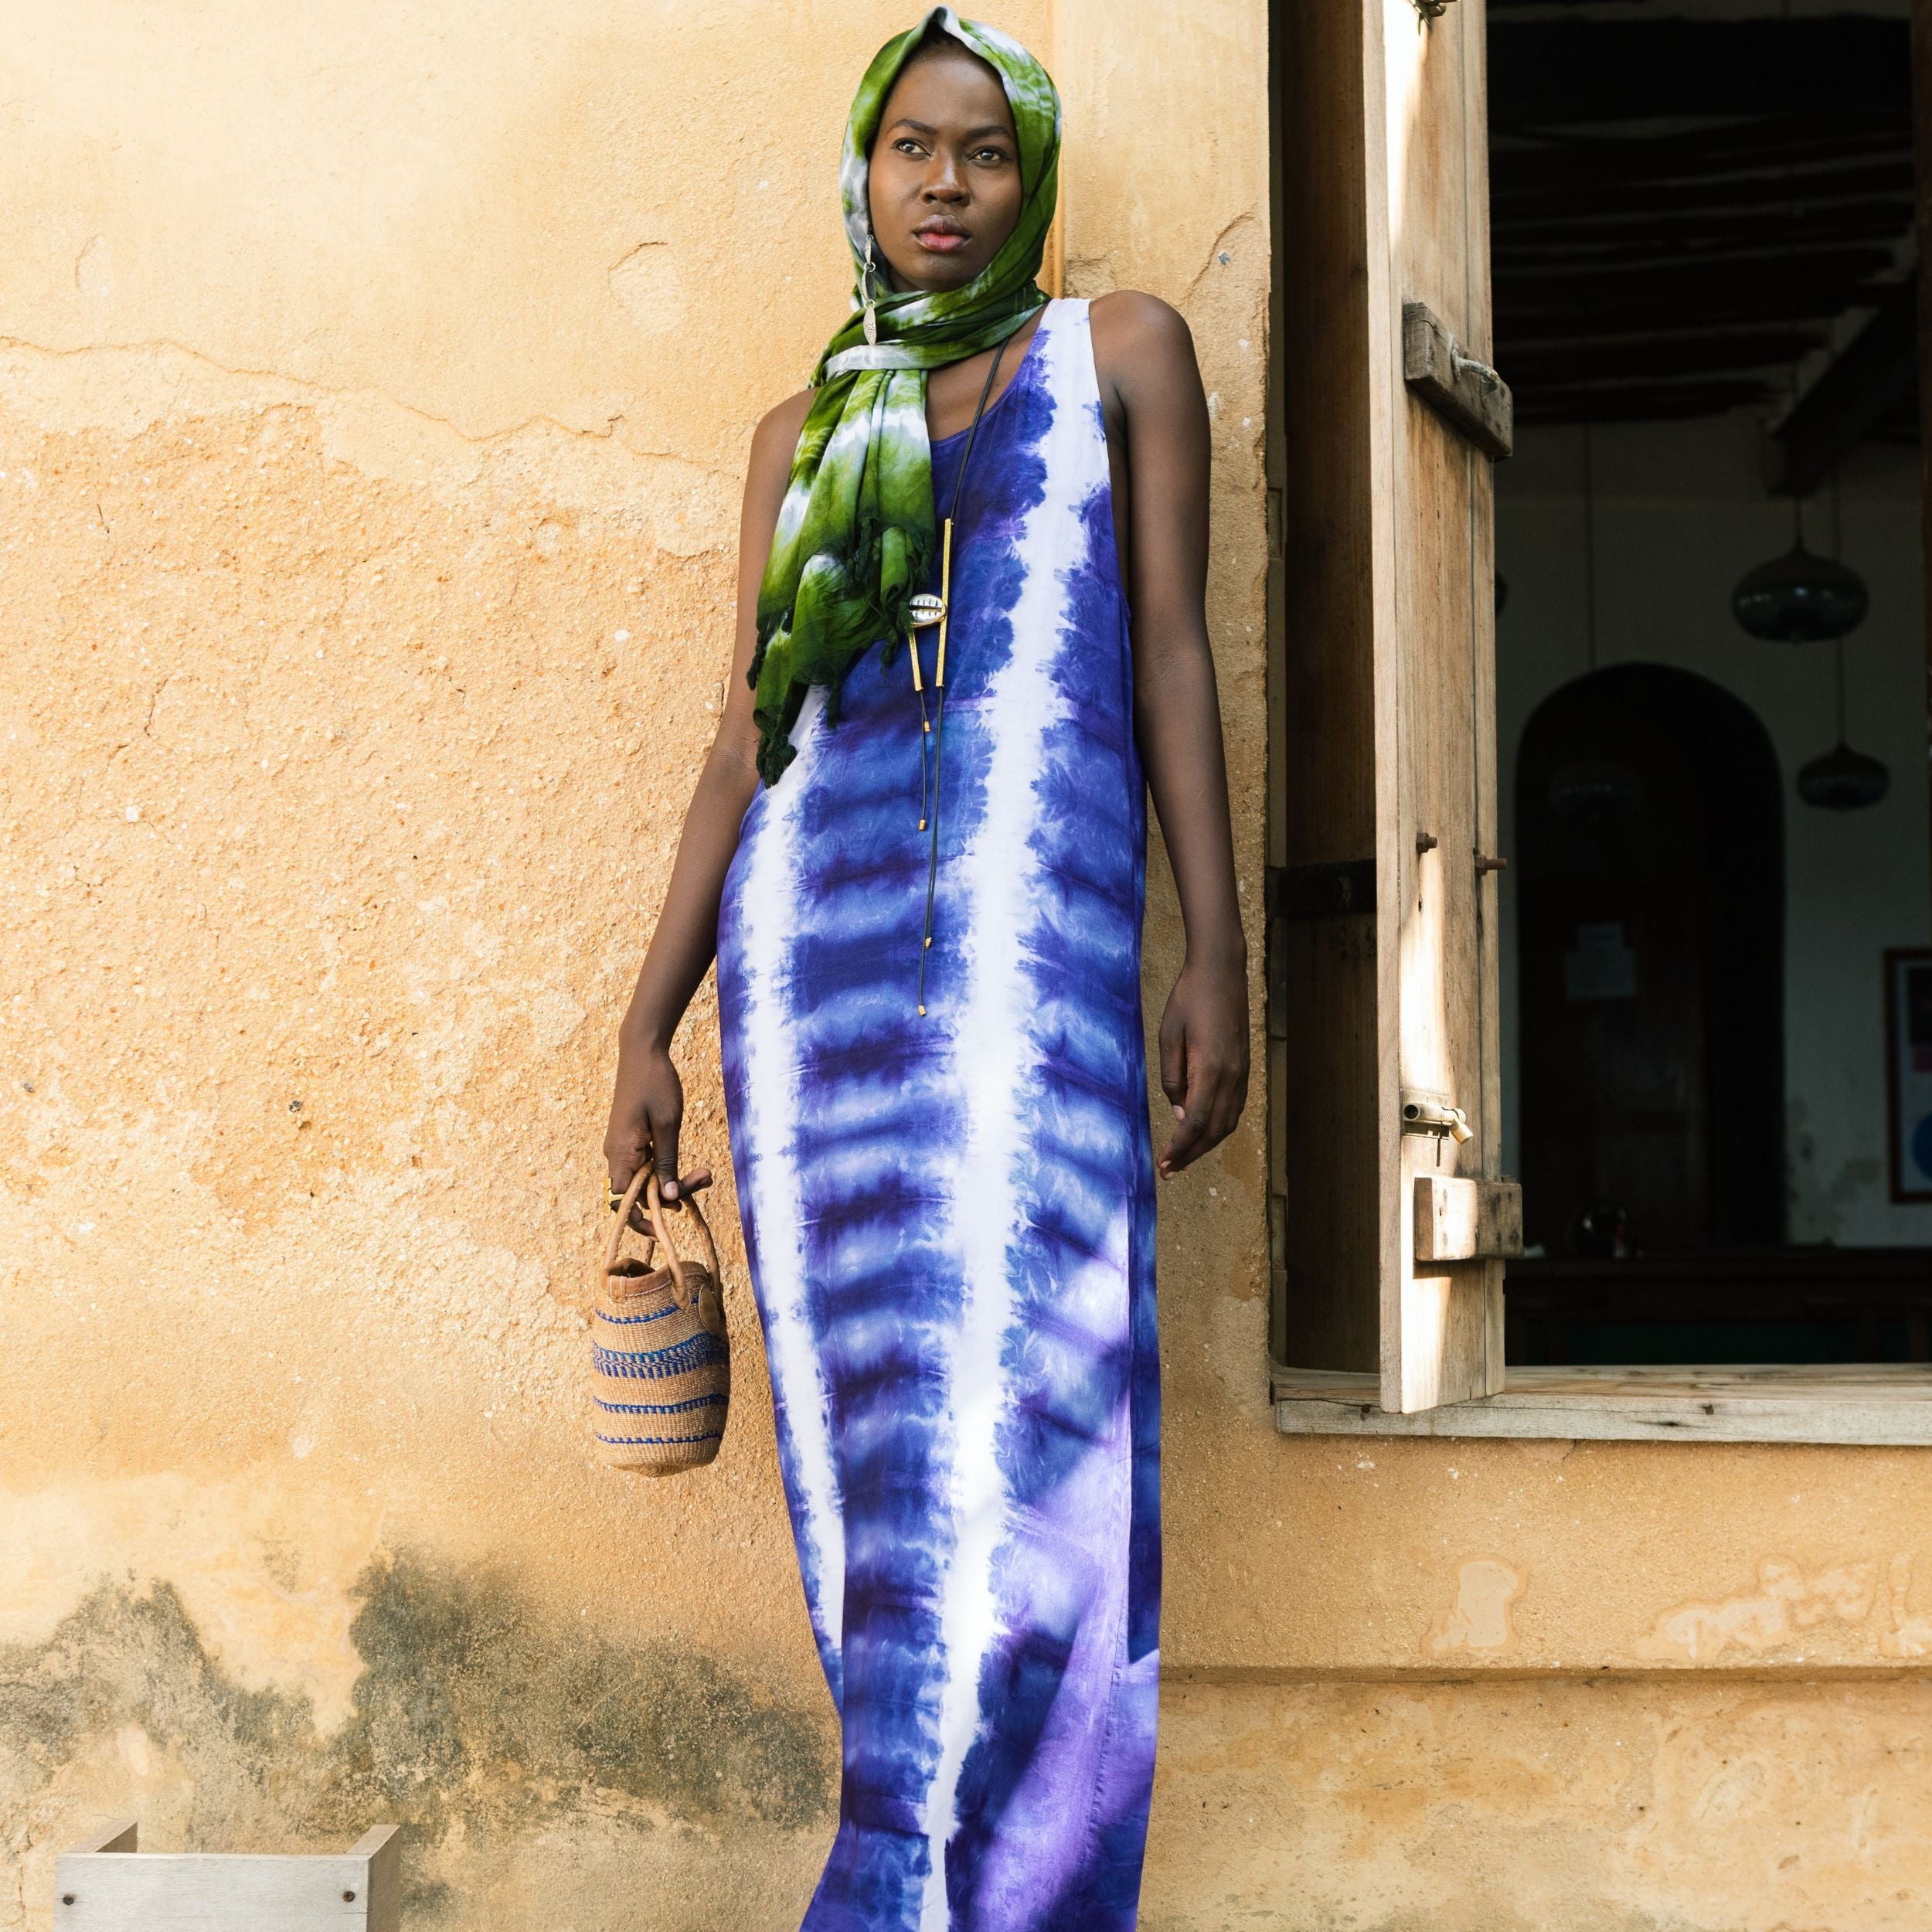 Editorial photo: Model wears Long Dress in Tie Dye Soft Blue while holding a  Mini Shopping Bag in Sisal Blue Stripes and is wearing the Pareo in Tie Dye Intense Green on her head.